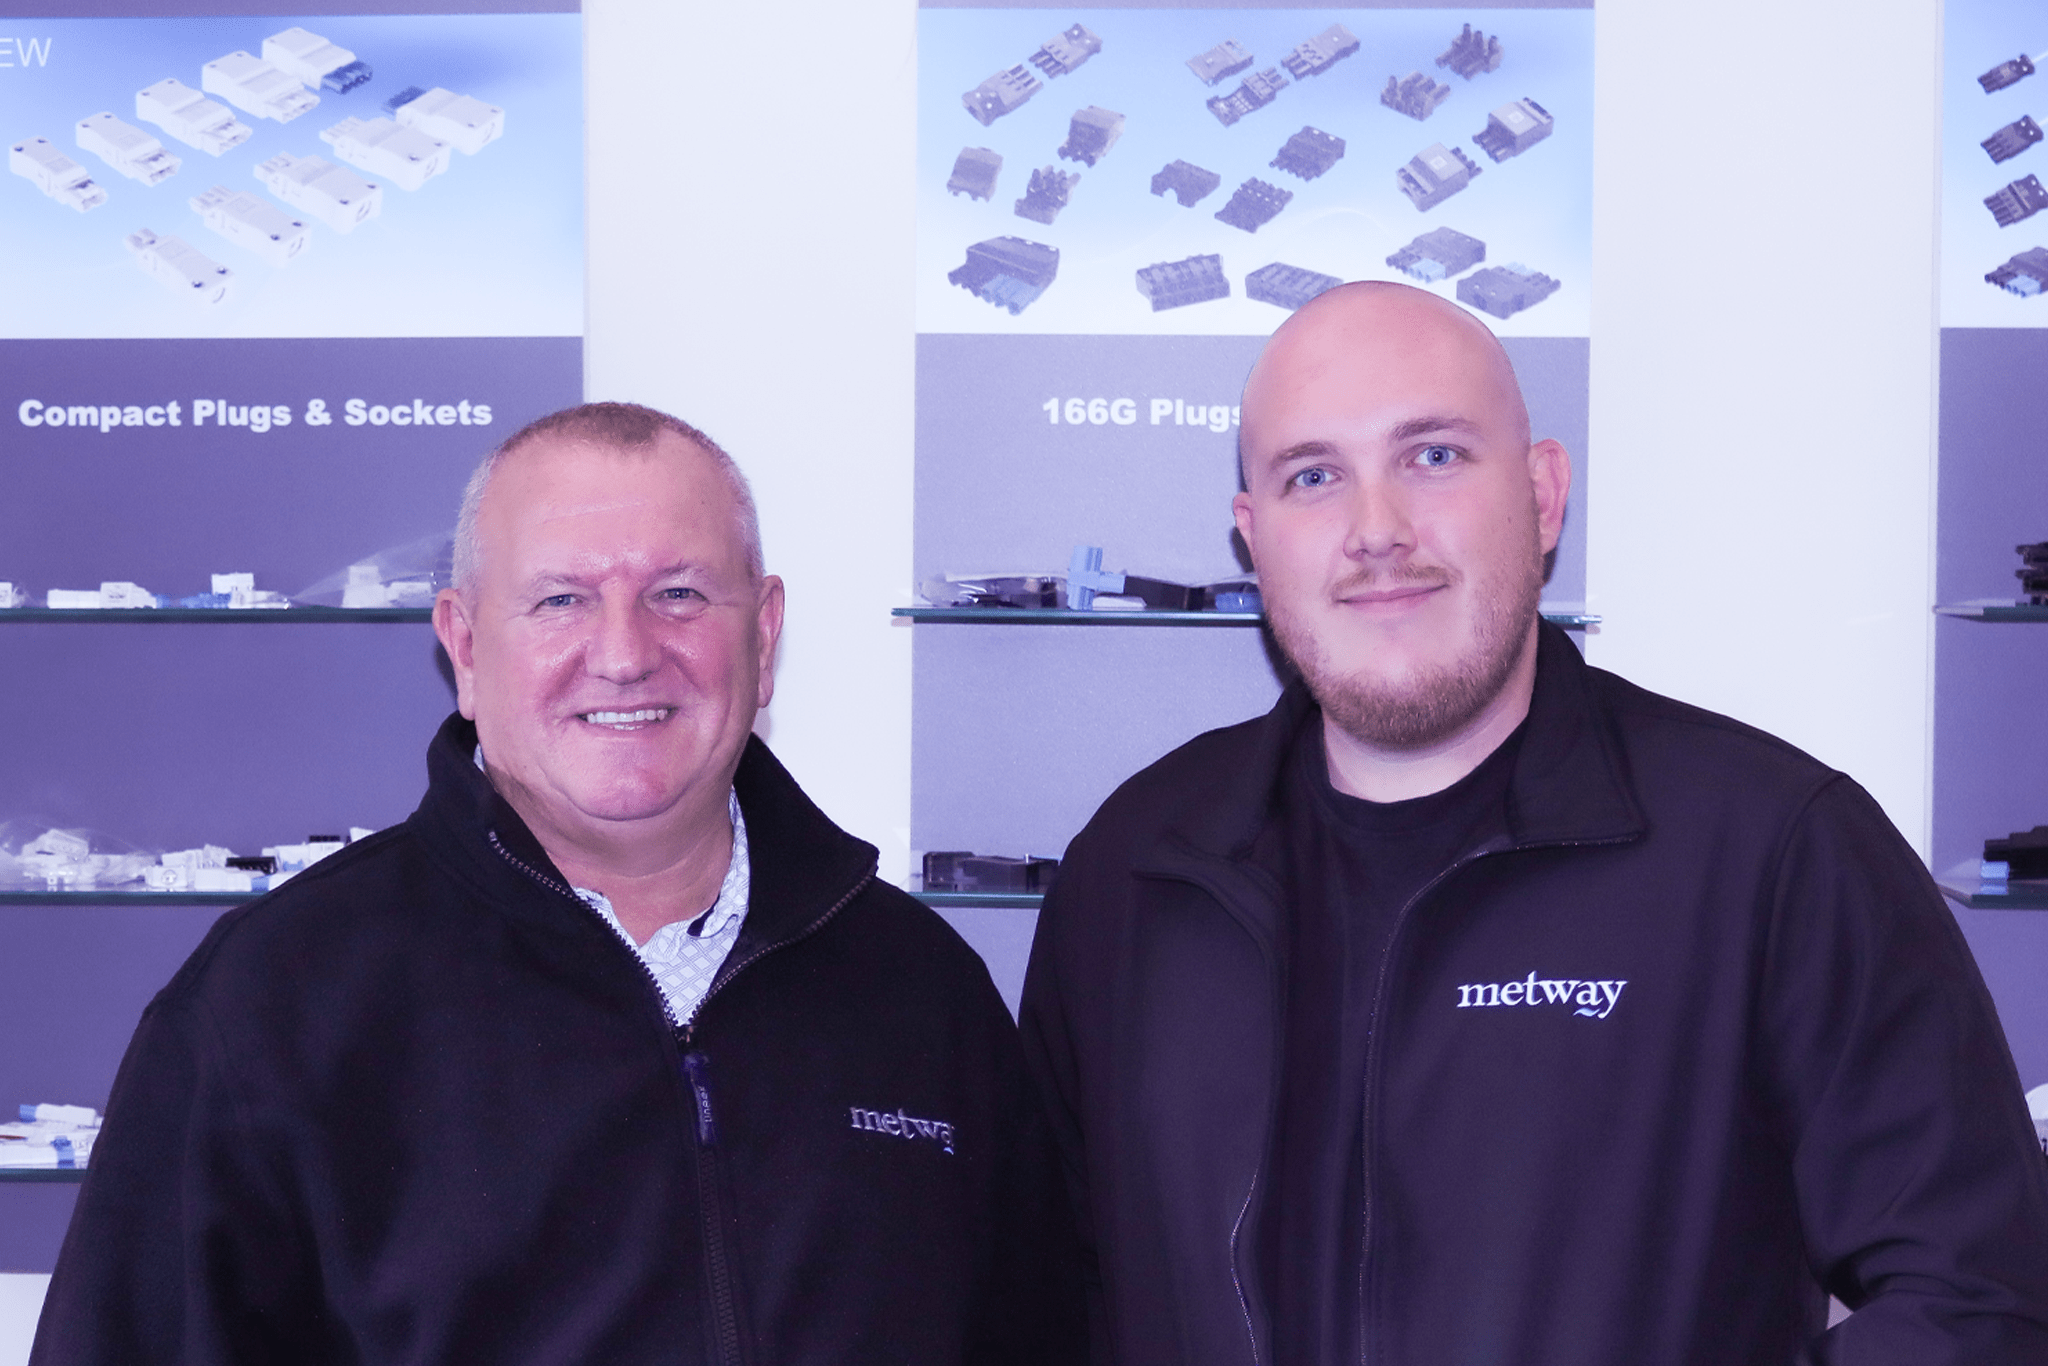 METWAY ARE PLEASED TO ANNOUNCE THE APPOINTMENT OF JOHN MERCER AND AARRON ANCELL TO THEIR WIRING SYSTEMS TEAM